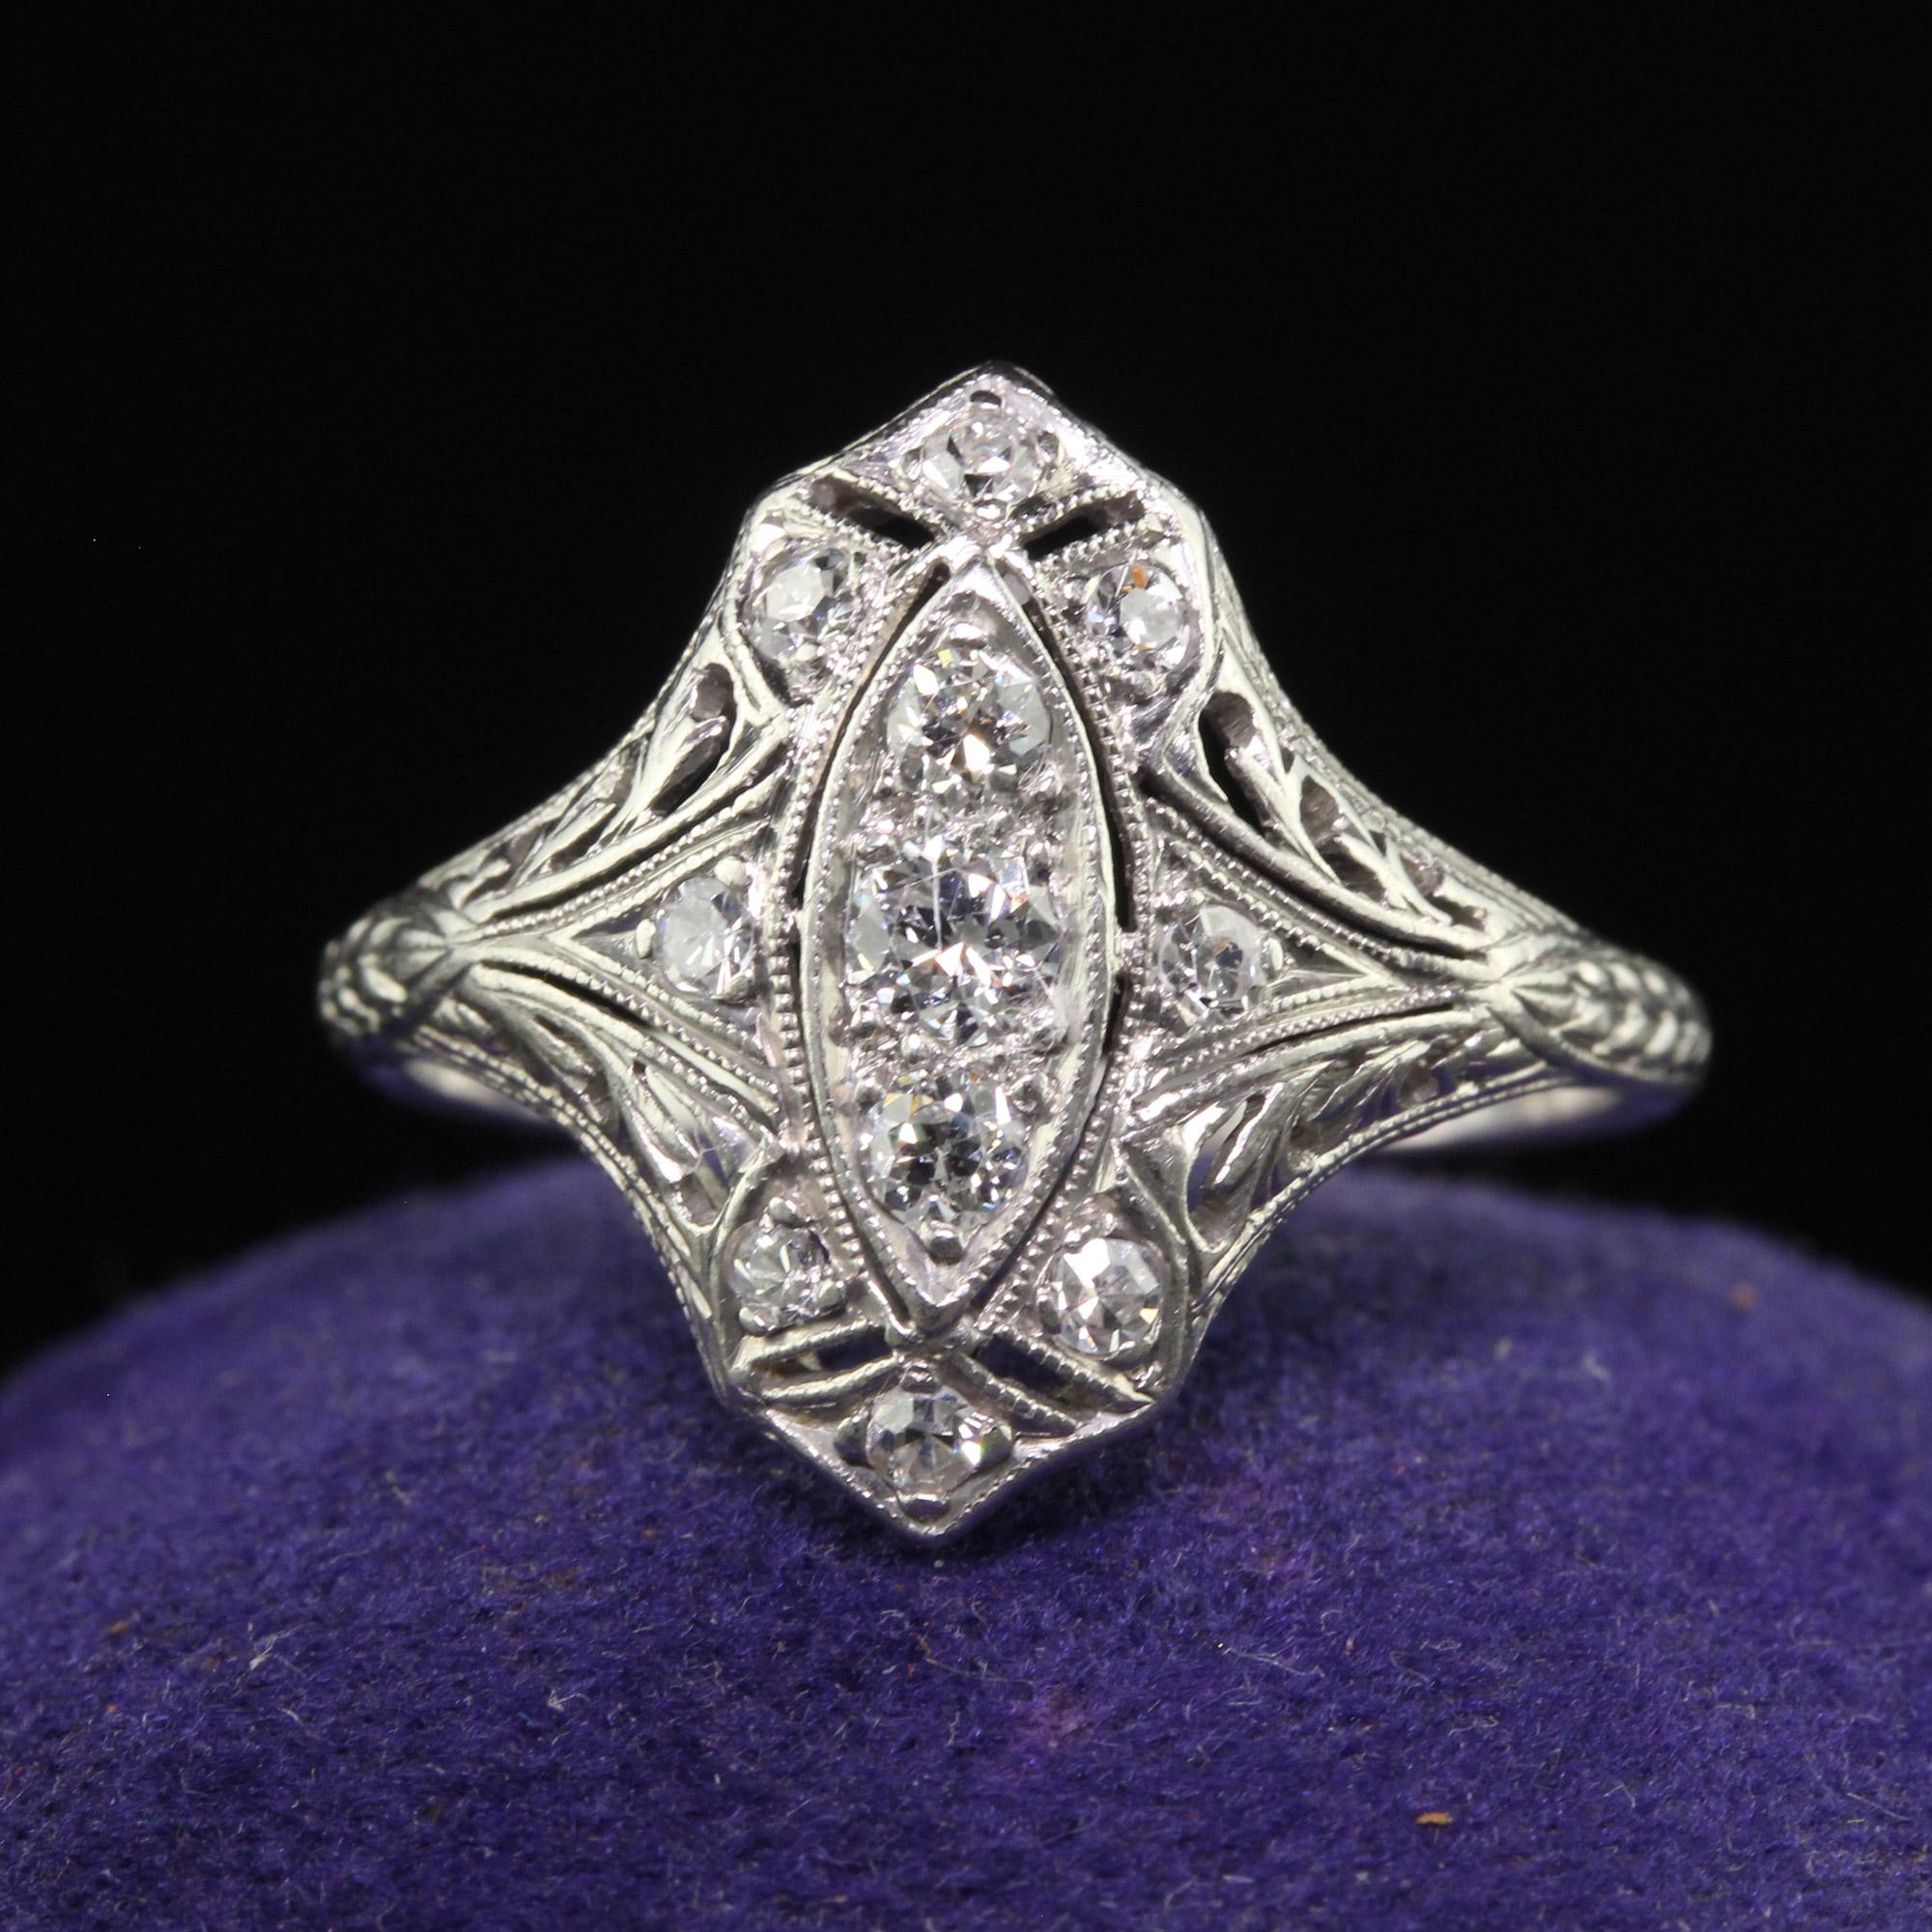 Beautiful Antique Art Deco Platinum Old European Diamond Filigree Shield Ring. This gorgeous art deco shield ring is crafted in platinum. This beautiful ring has old European cut diamonds set on top of an amazing engraved Art Deco mounting. This